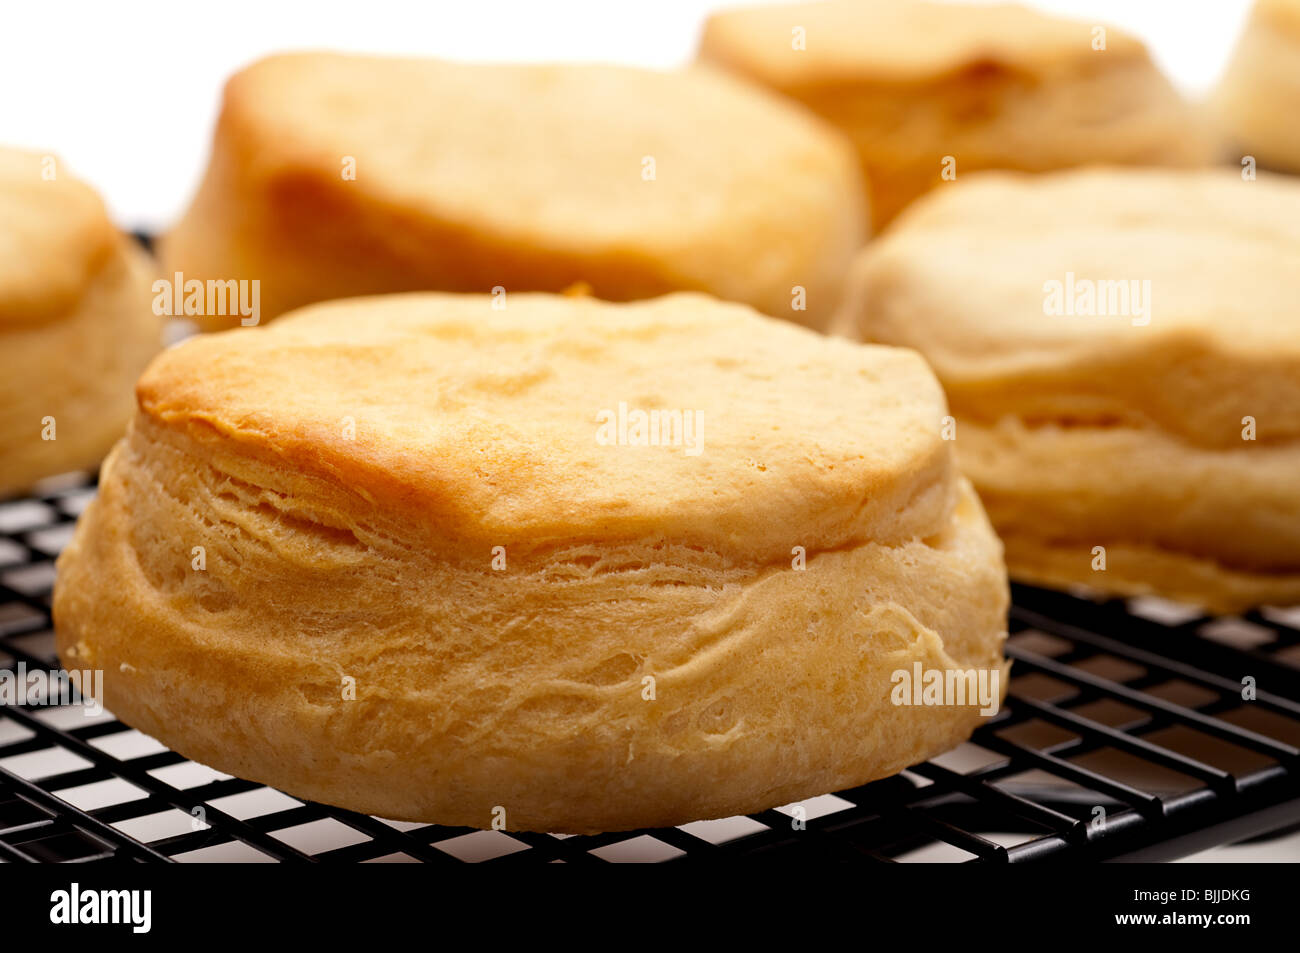 Horizontal shallow focus close up of fresh baked biscuits Stock Photo